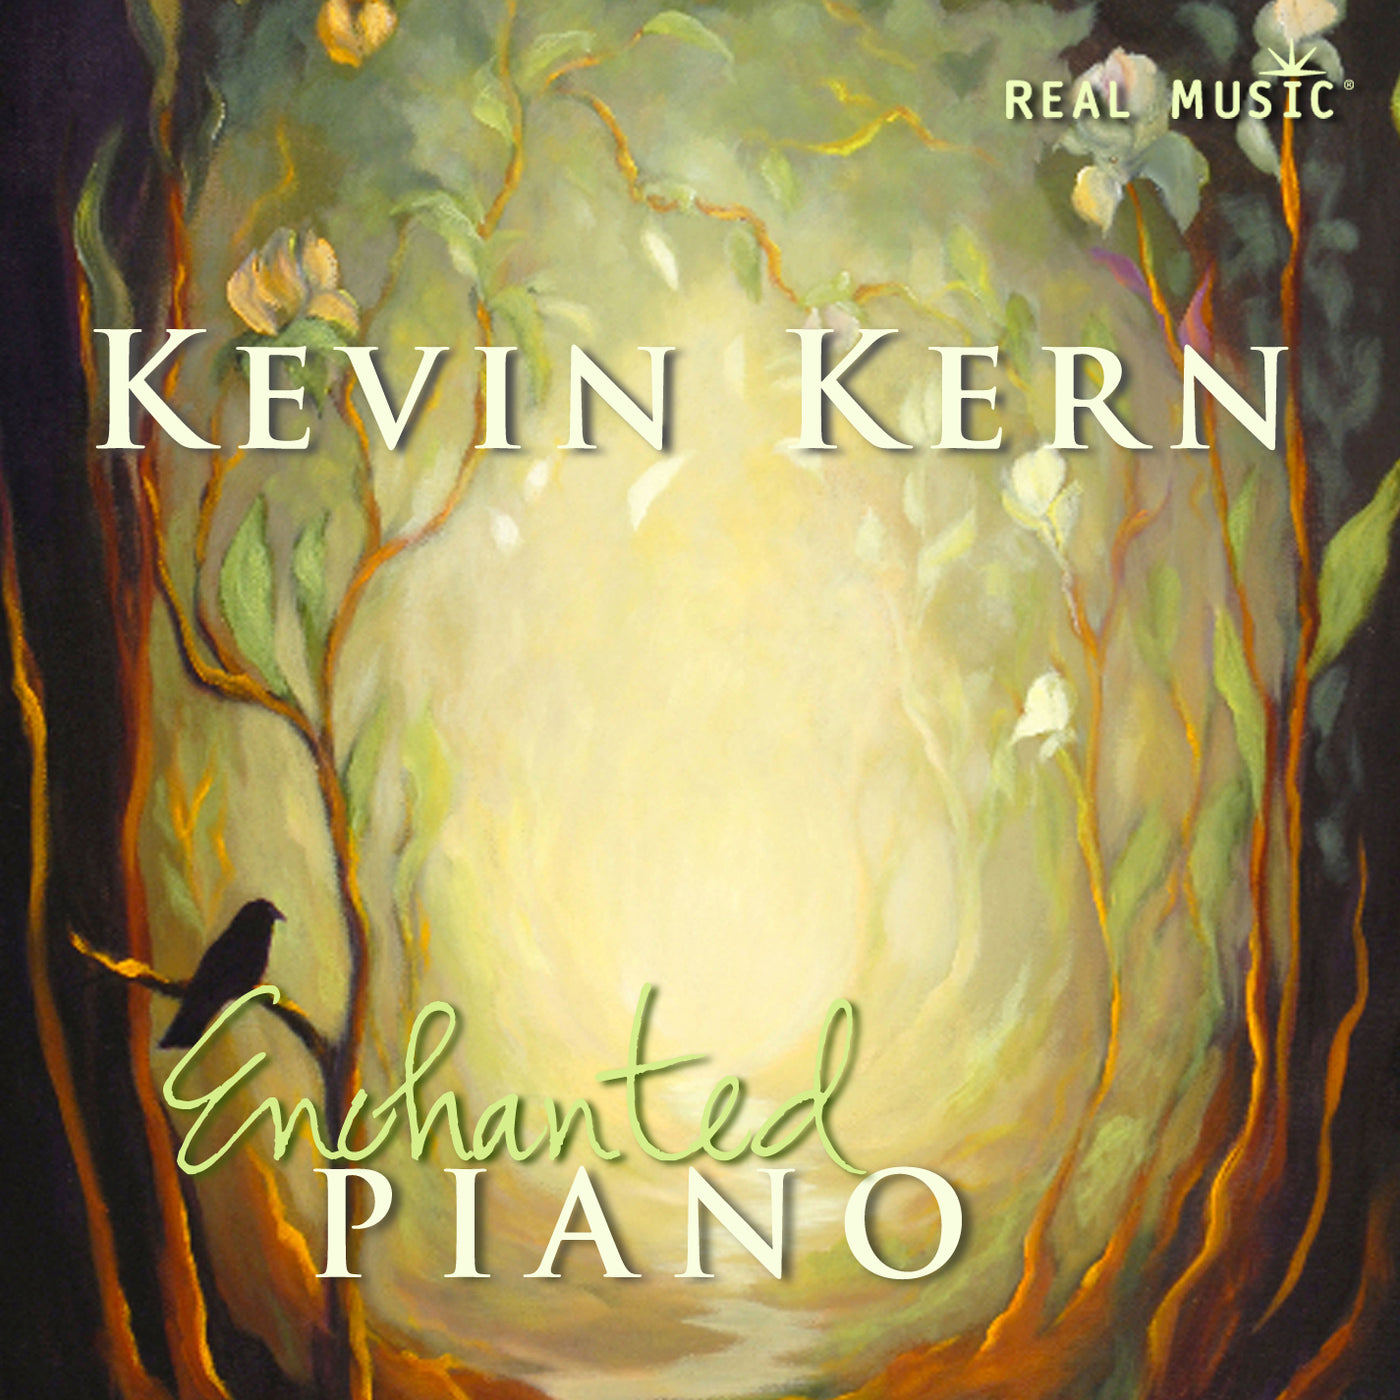 Enchanted Piano by Kevin Kern, cd cover.